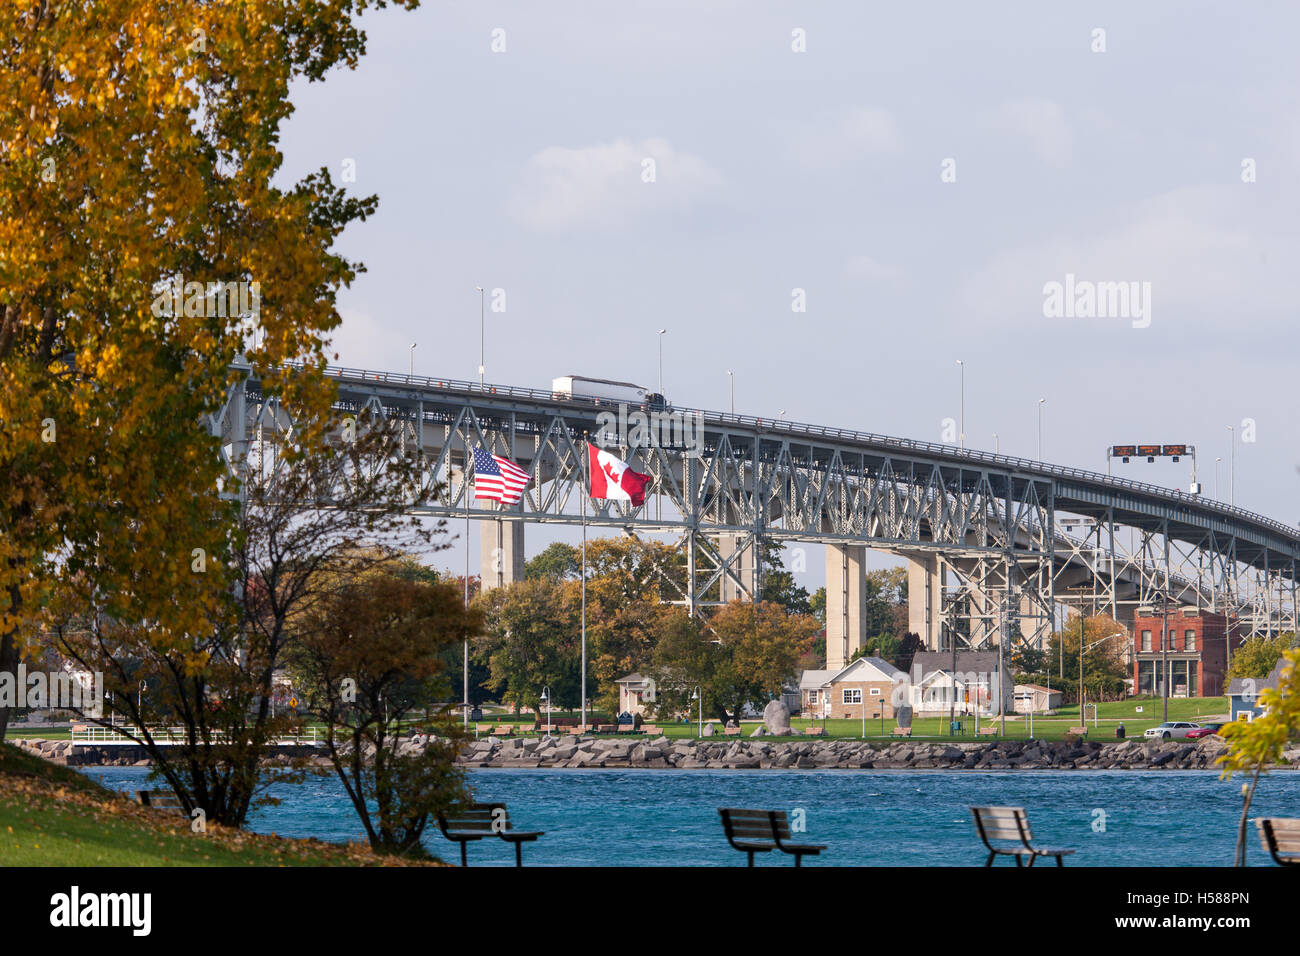 The Bluewater Bridge spanning the St. Clair River connects Sarnia Ontario, Canada, to Port Huron Michigan, USA. Stock Photo